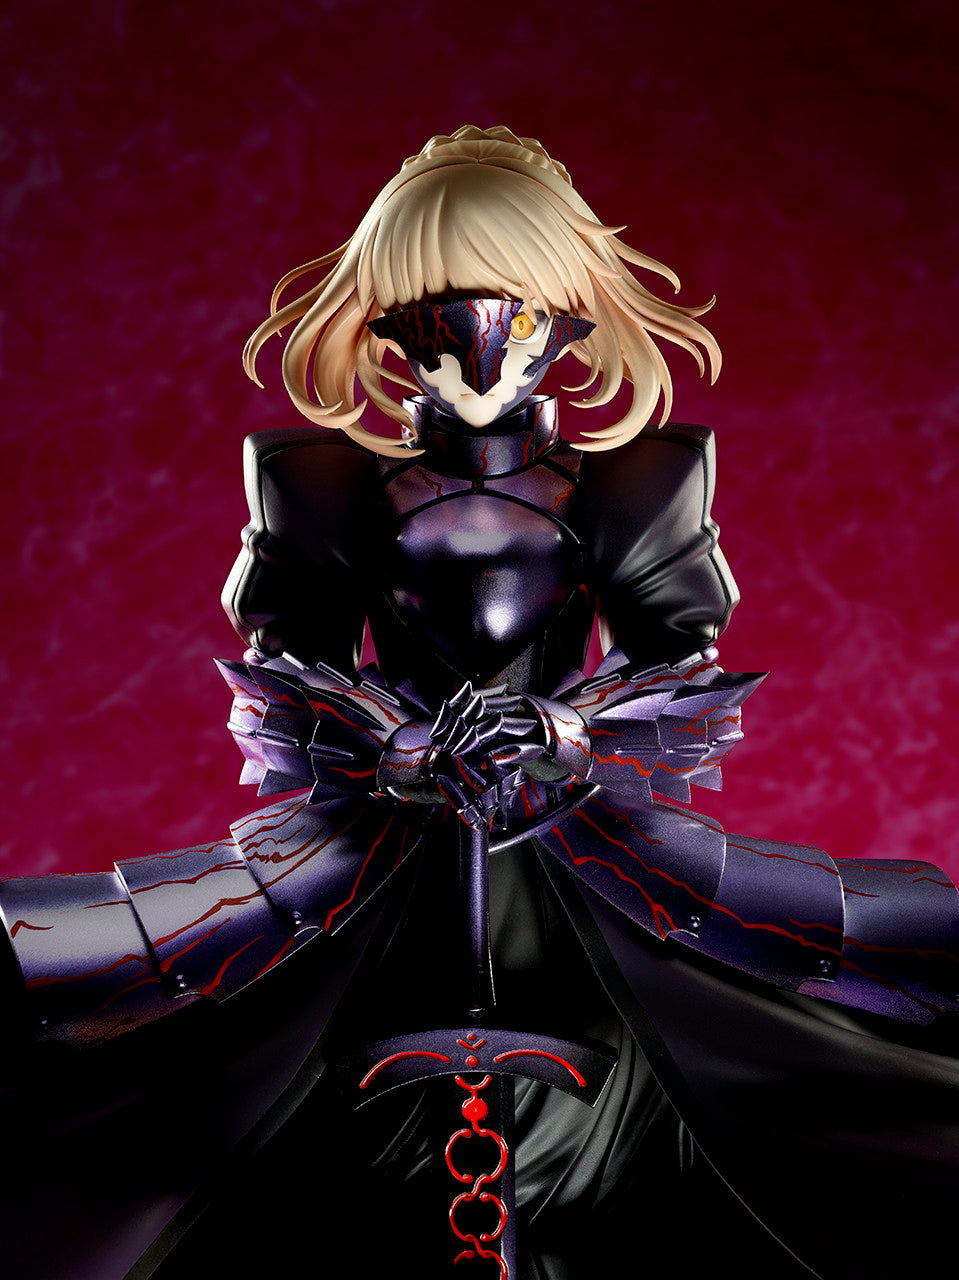 Fate/stay night: Heaven's Feel II. lost butterfly - Saber Alter - 1/7 (Aniplex, Stronger) [Shop Exclusive], Franchise: "Gekijouban Fate/stay Night Heaven's Feel", Release Date: 10. May 2021, Nippon Figures